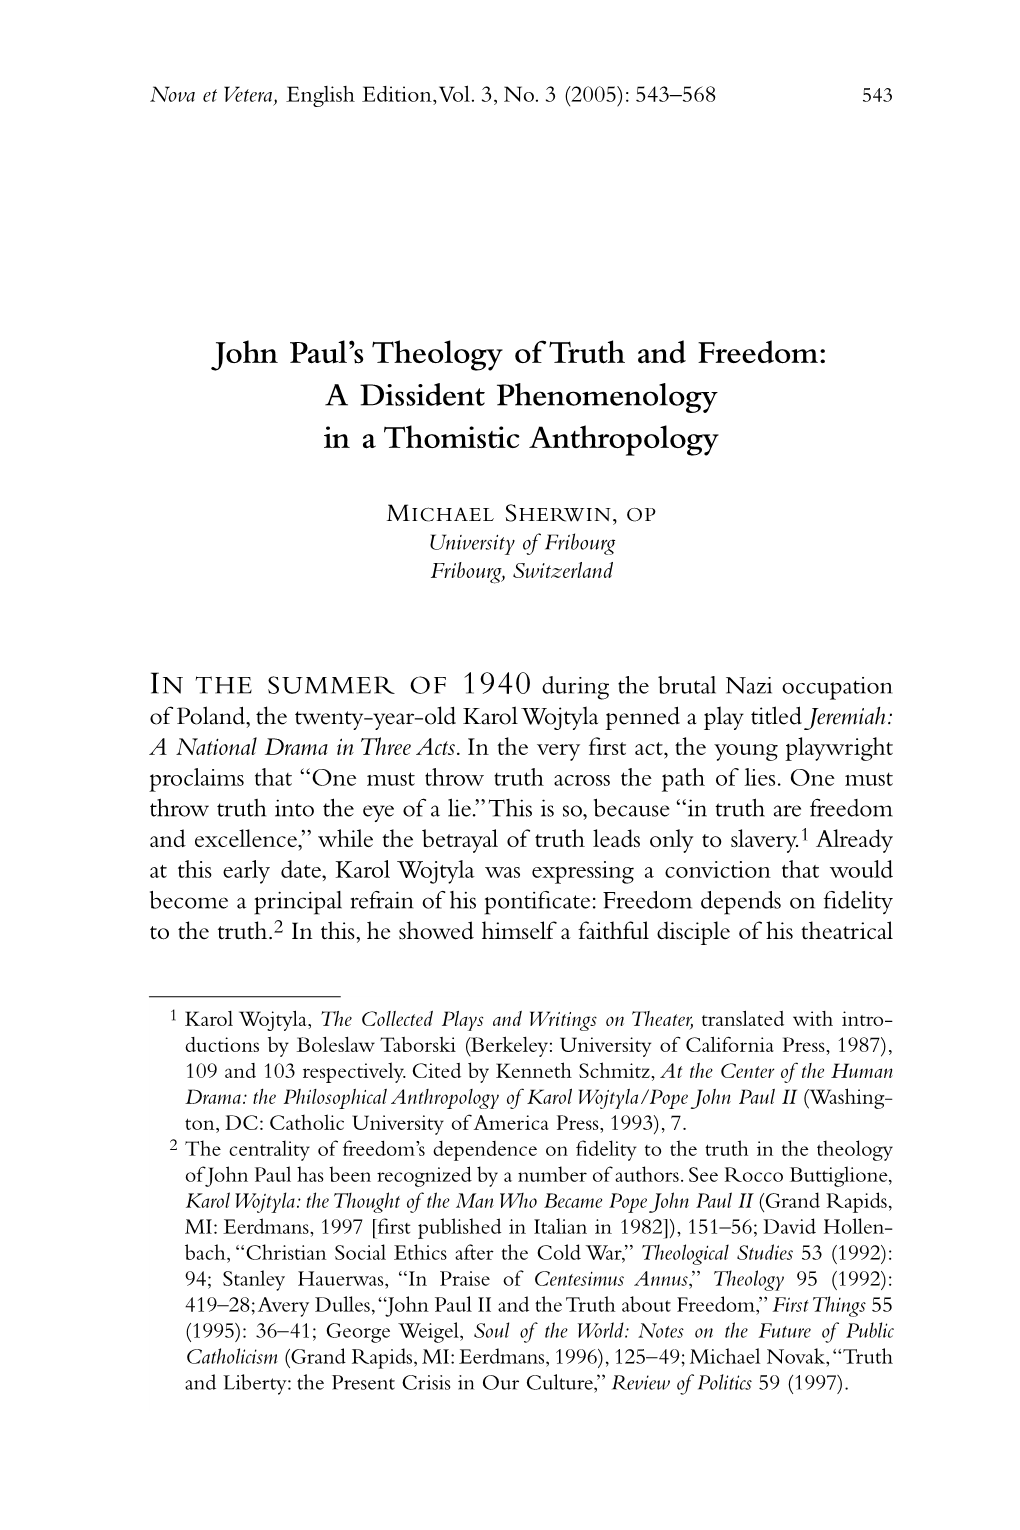 John Paul's Theology of Truth and Freedom